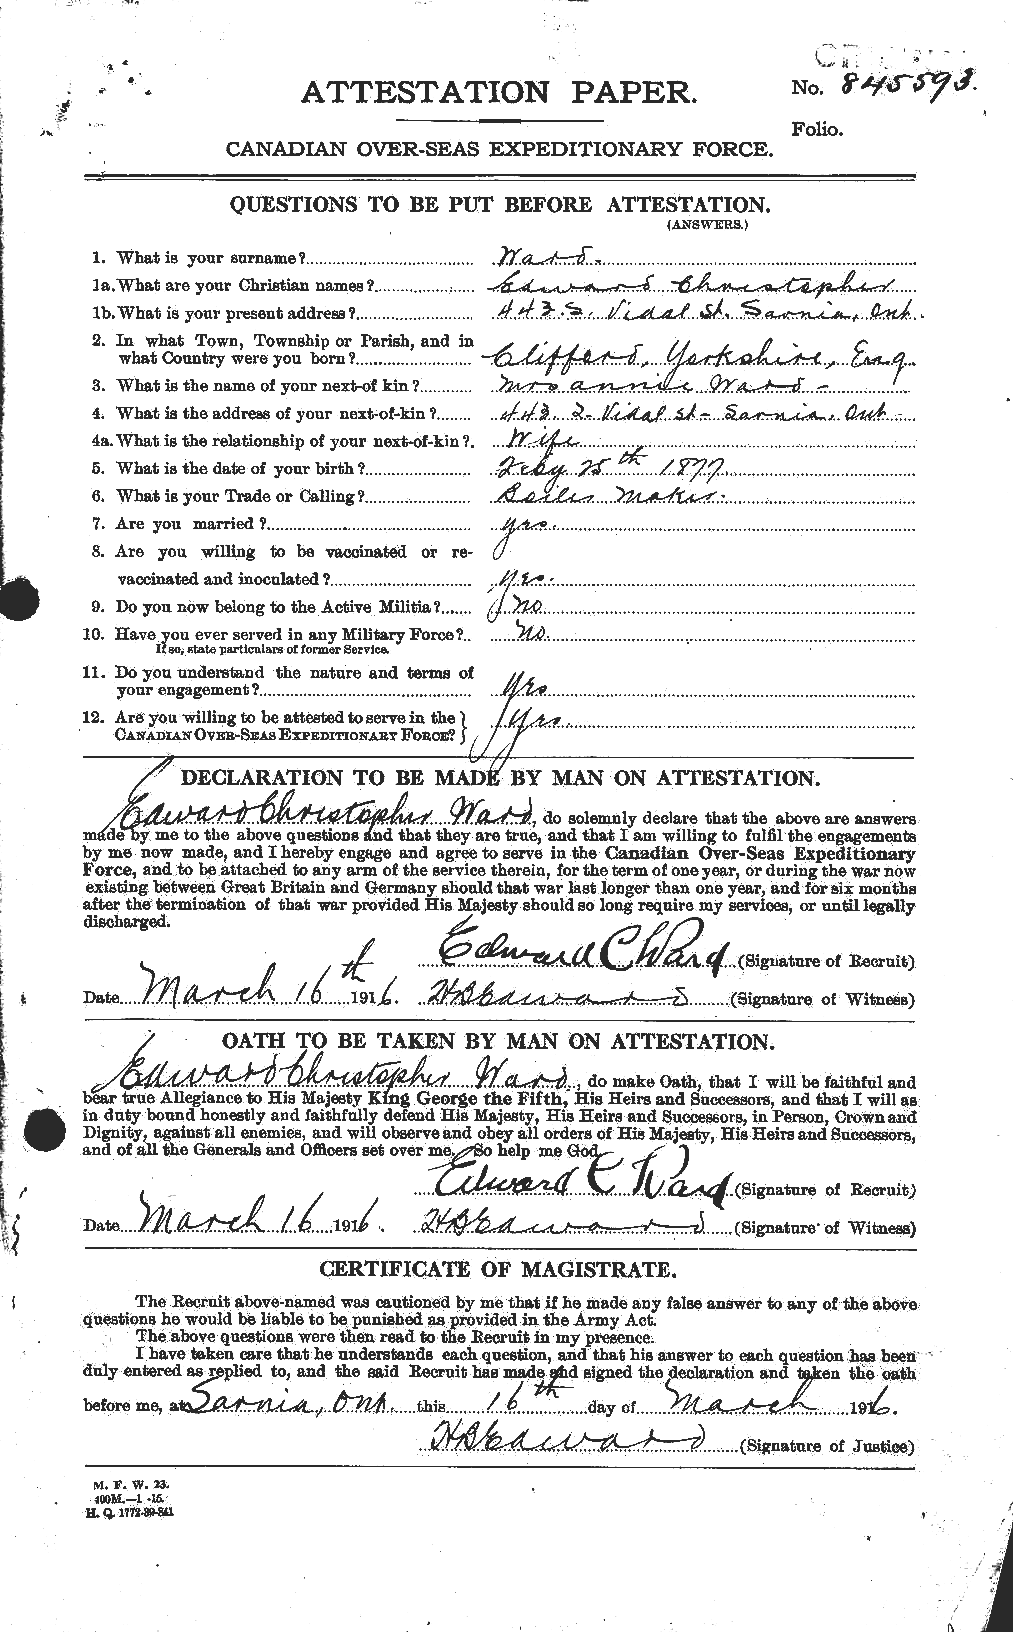 Personnel Records of the First World War - CEF 657649a